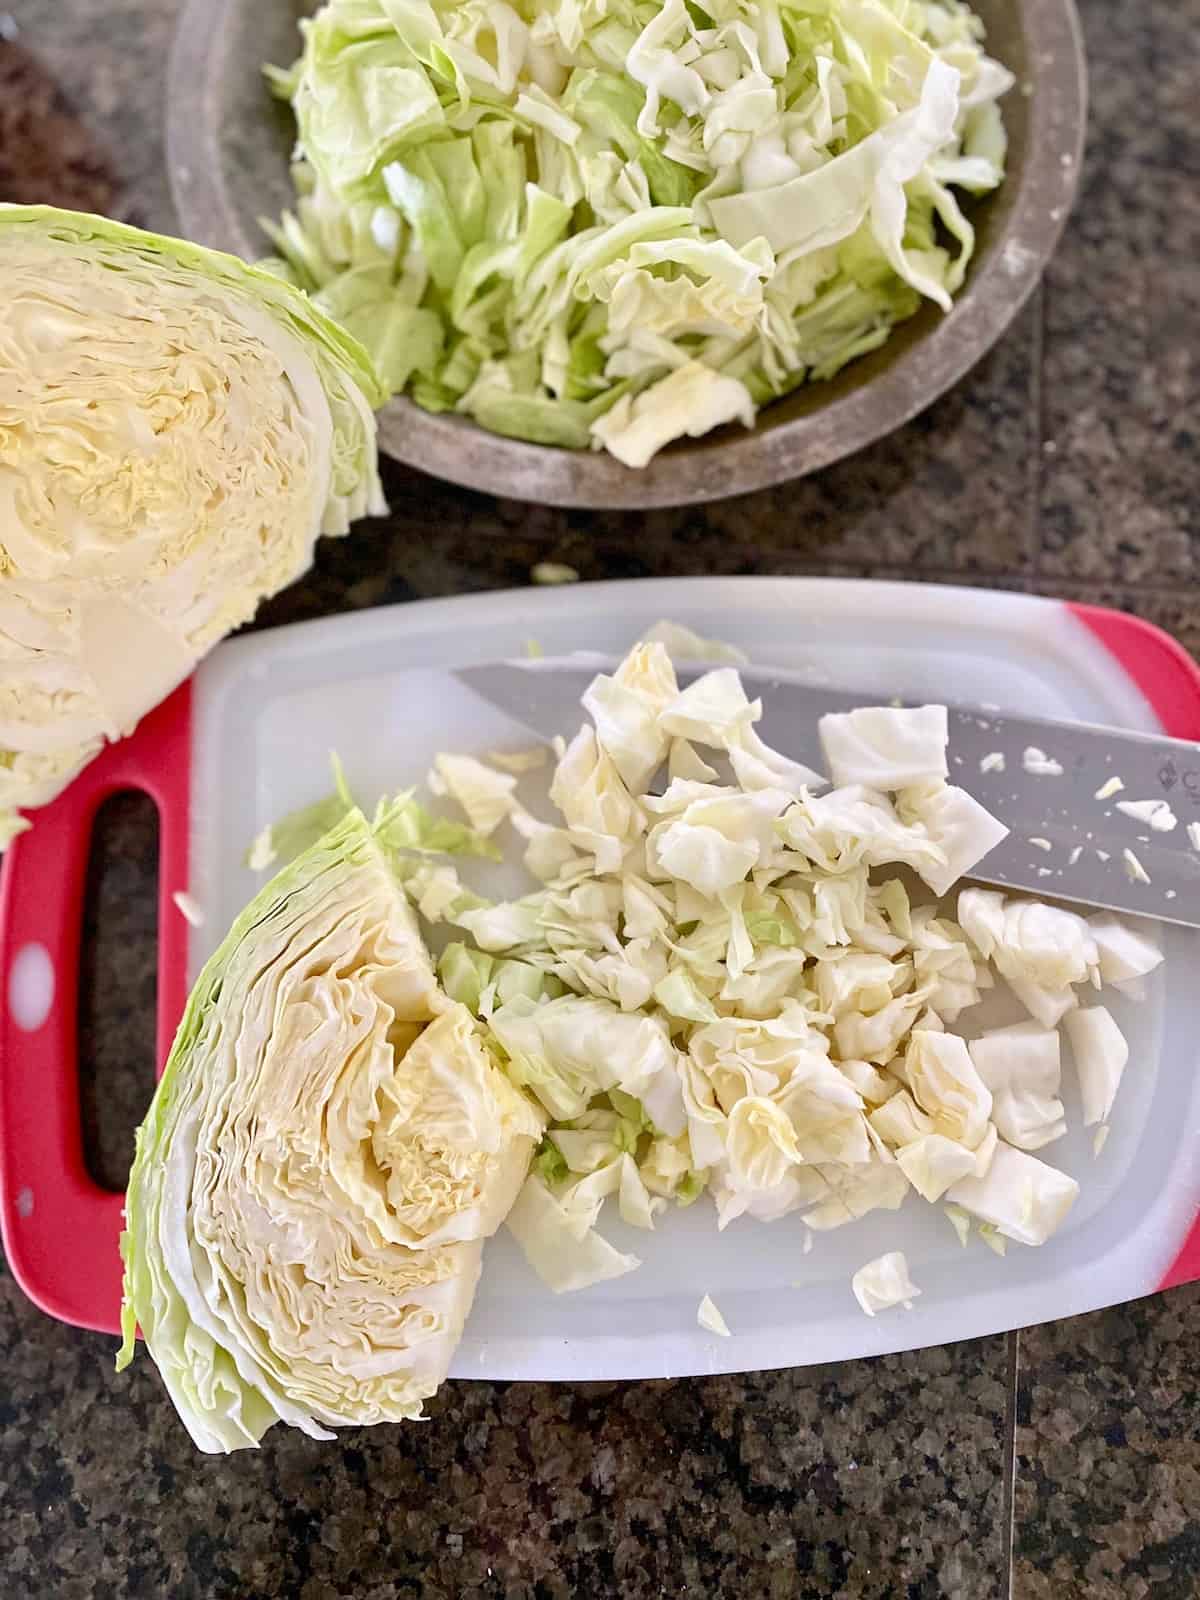 cabbage being chopped on a cutting board